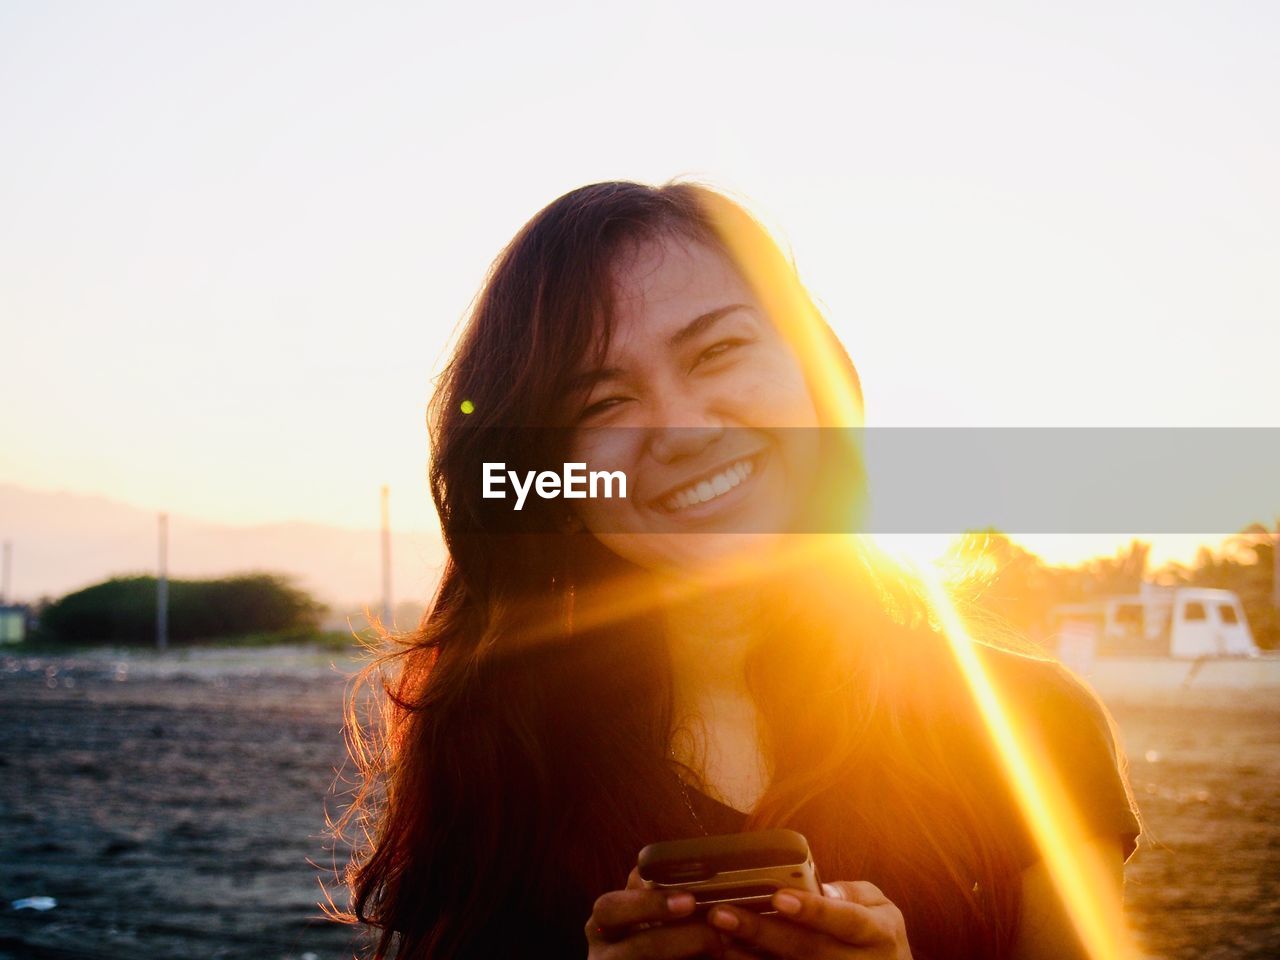 Portrait of happy young woman using smart phone against clear sky during sunset